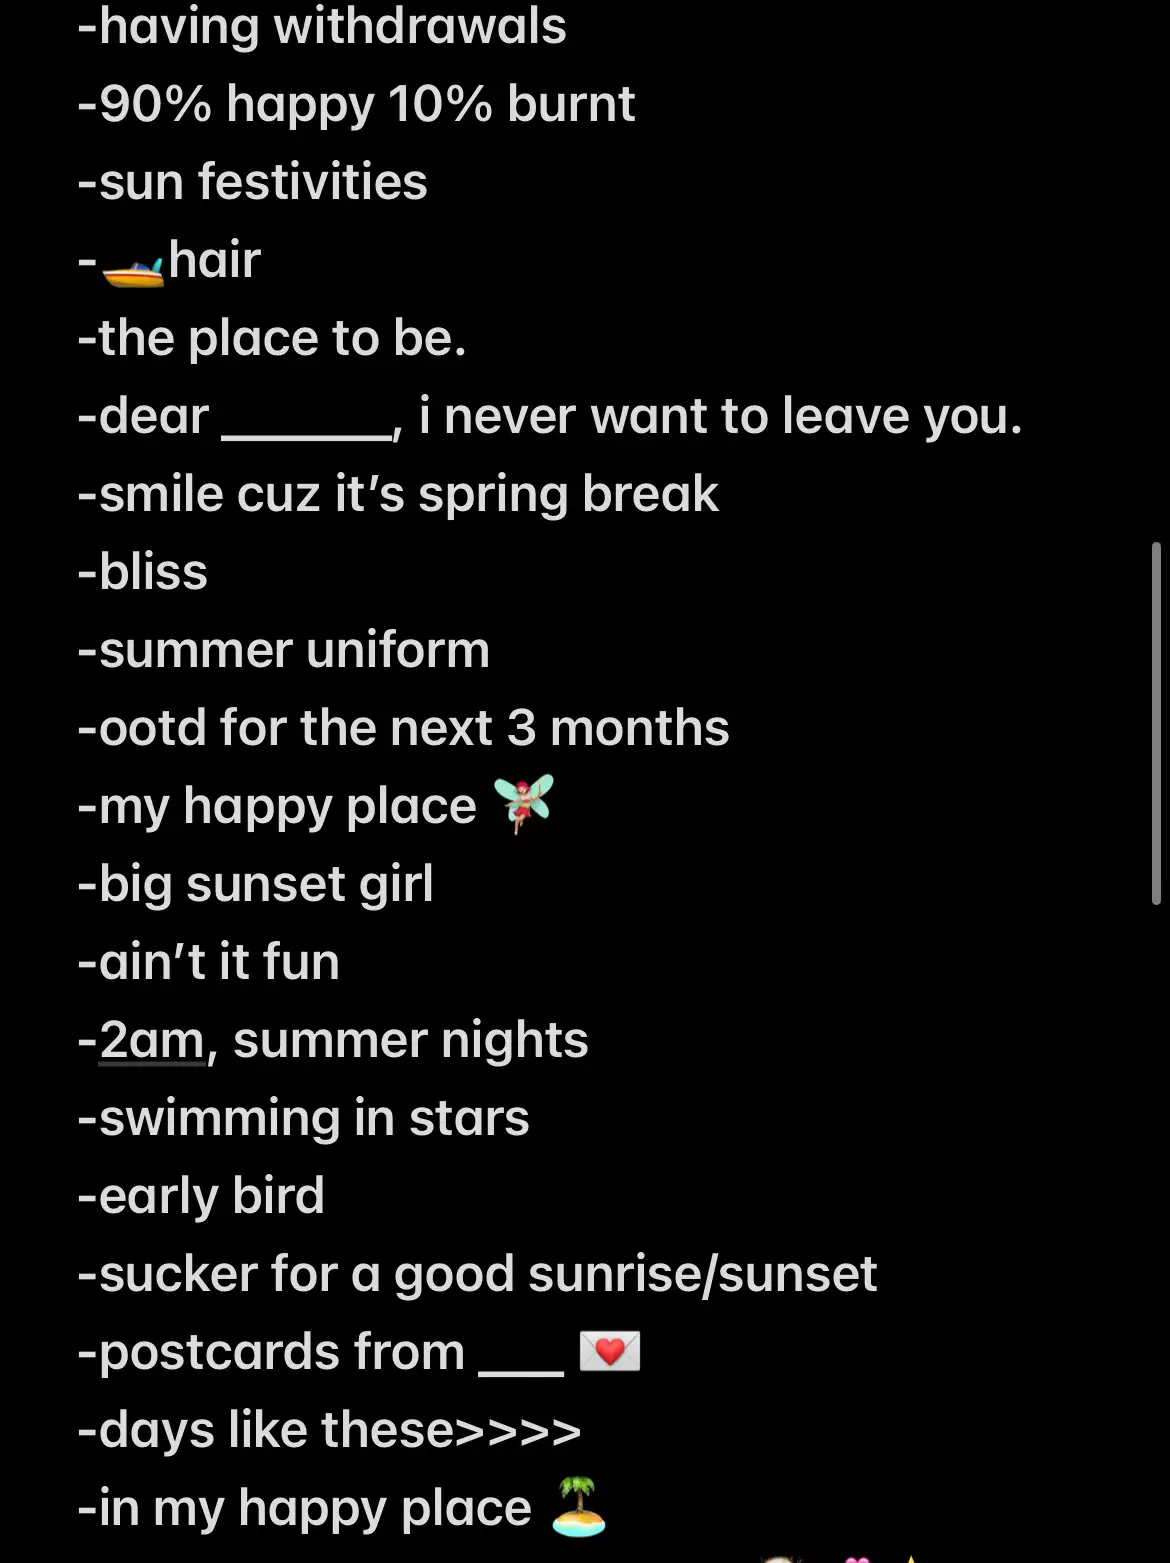  A list of things to do before leaving for summer vacation.